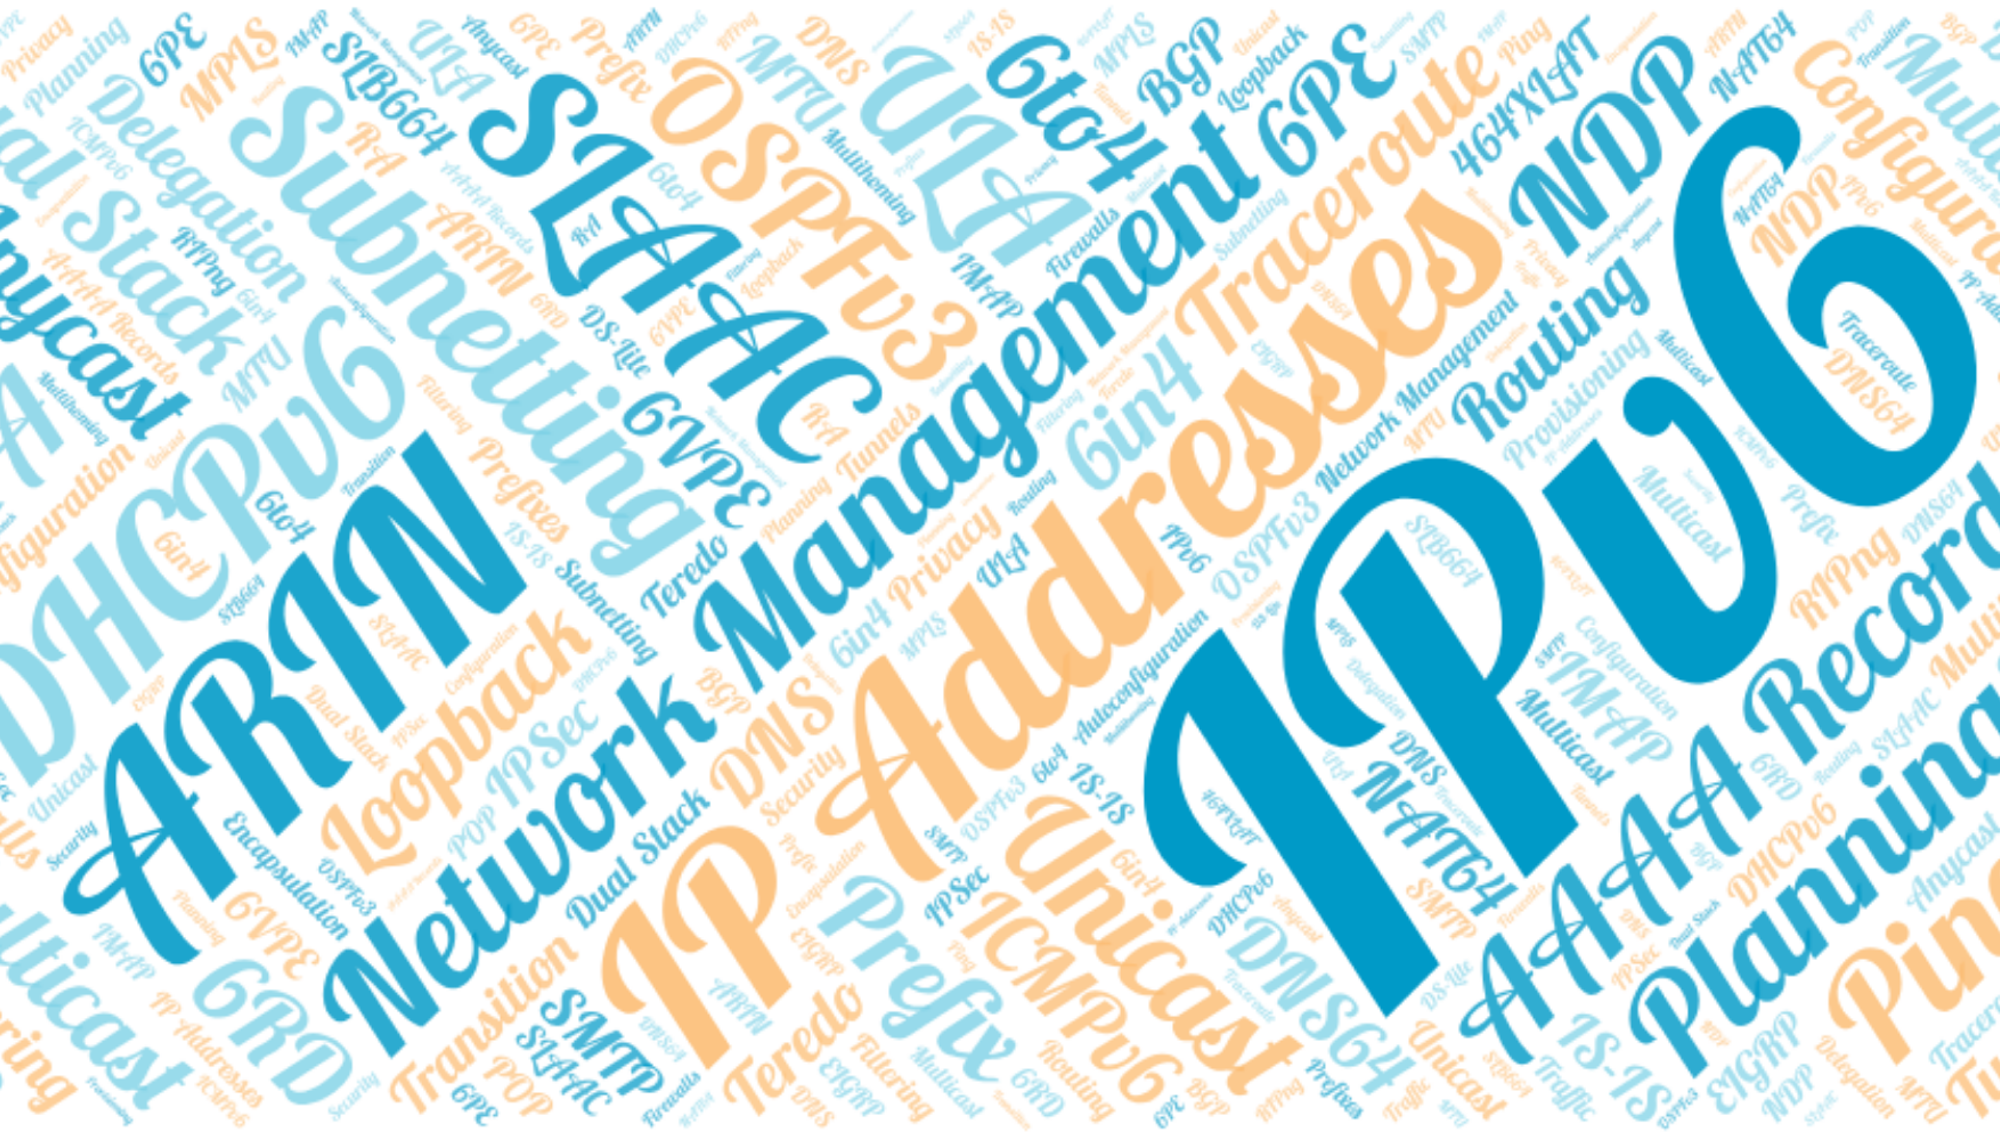 What is on your IPv6 training wish list?